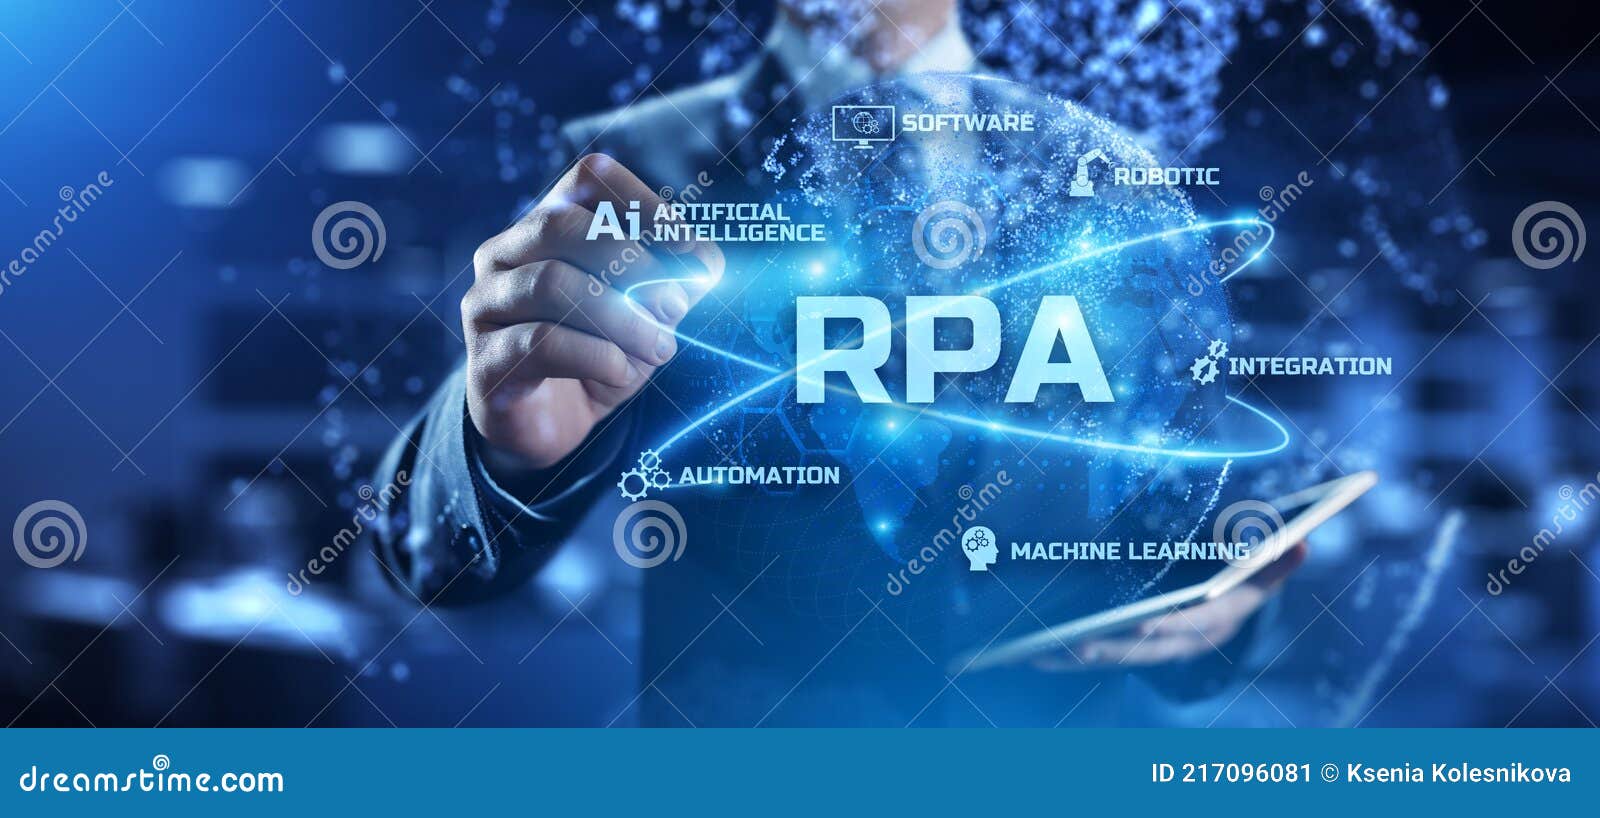 rpa robotic process automation innovation technology concept